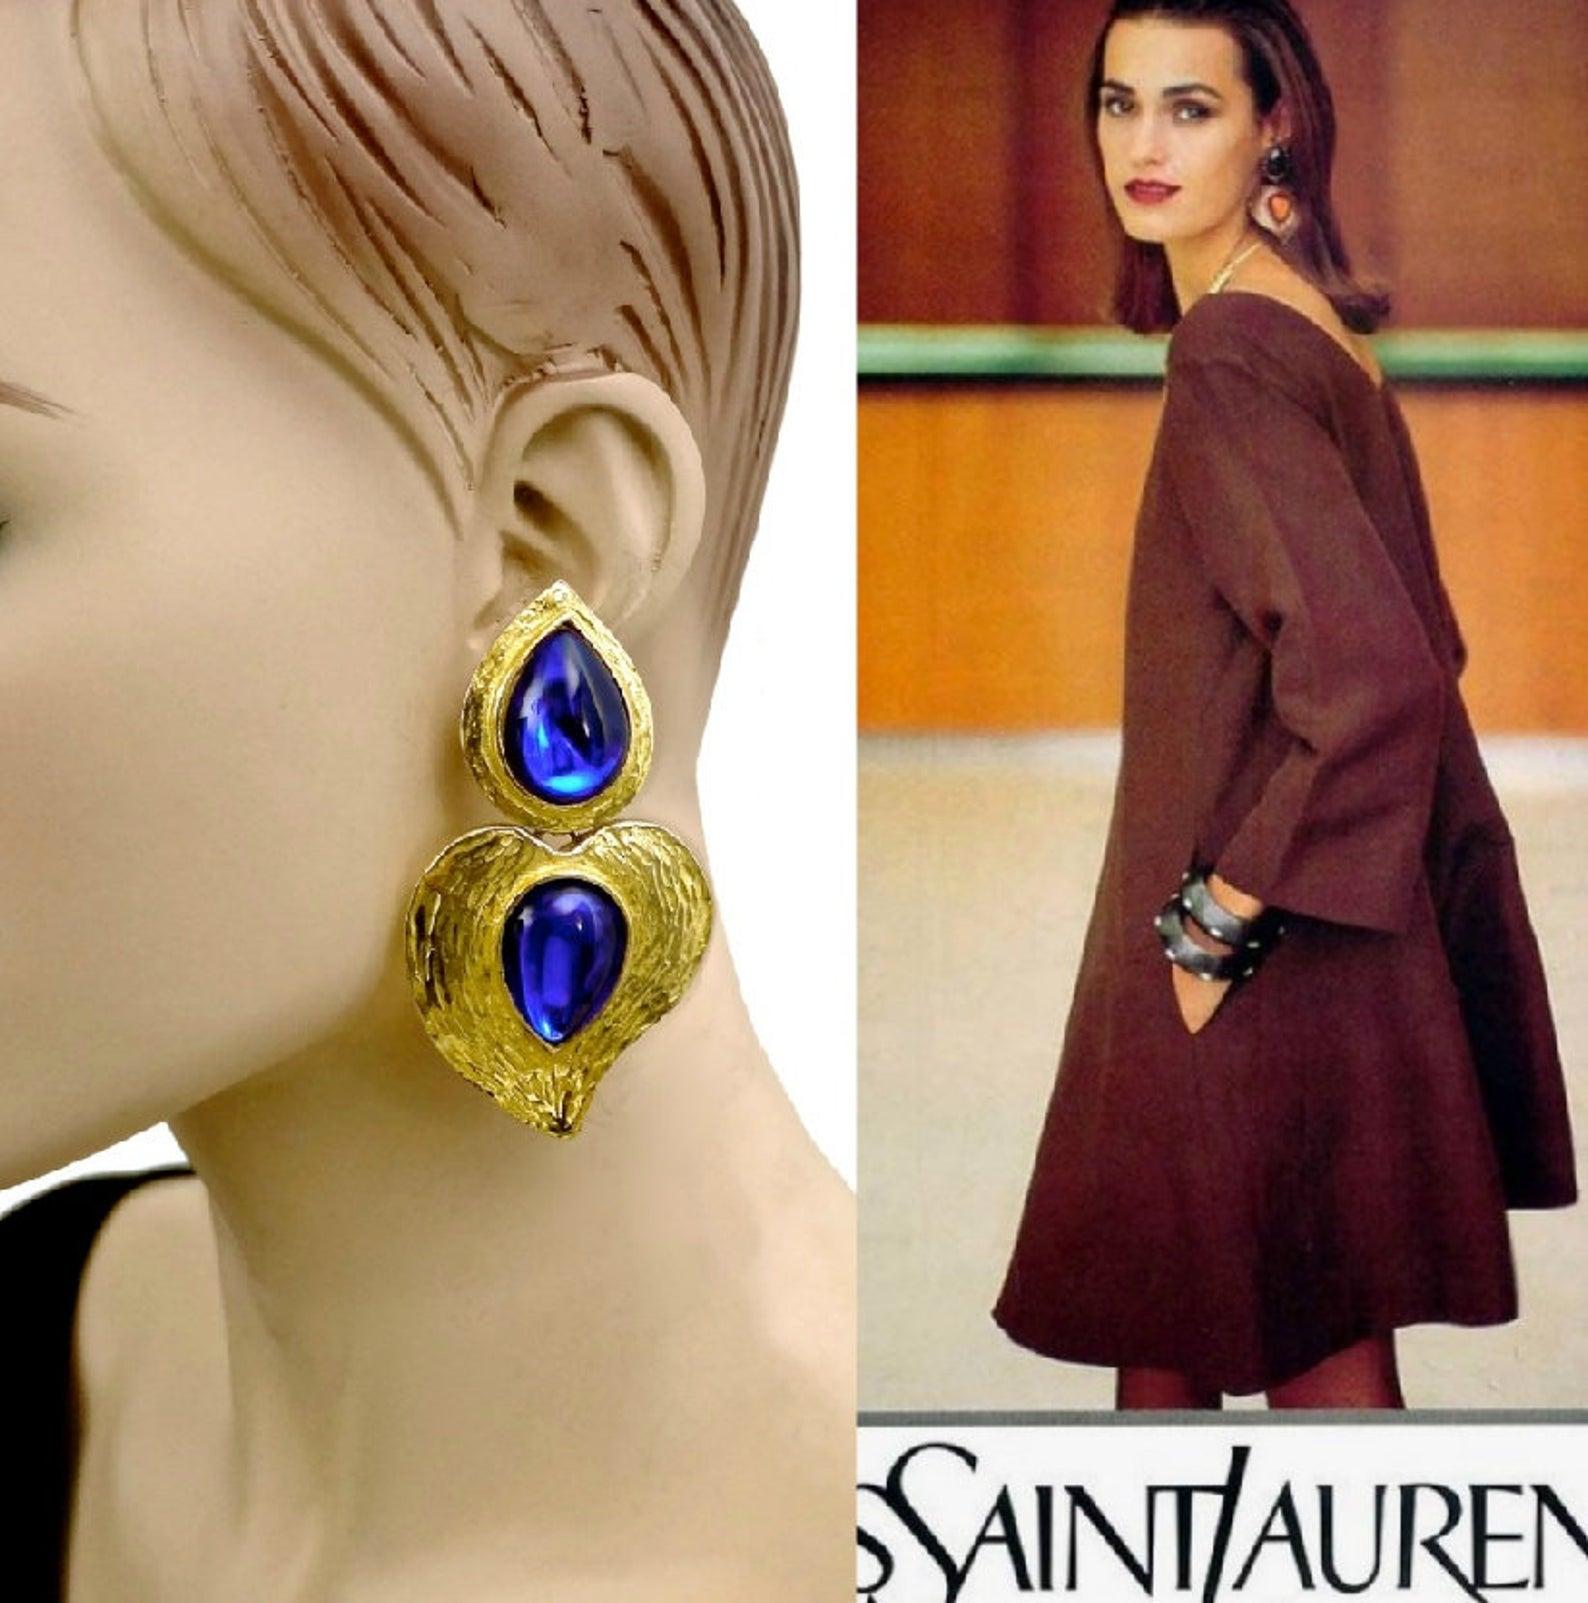 Vintage YSL Yves Saint Laurent by Robert Goossens Stylized Heart Blue Cabochon Drop Earrings

Measurements:
Height: 3.22 inches (8.2 cm)
Width: 1.81 inches (4.6 cm)
Weight per Earring: 31 grams

Features:
- 100% Authentic YVES SAINT LAURENT by